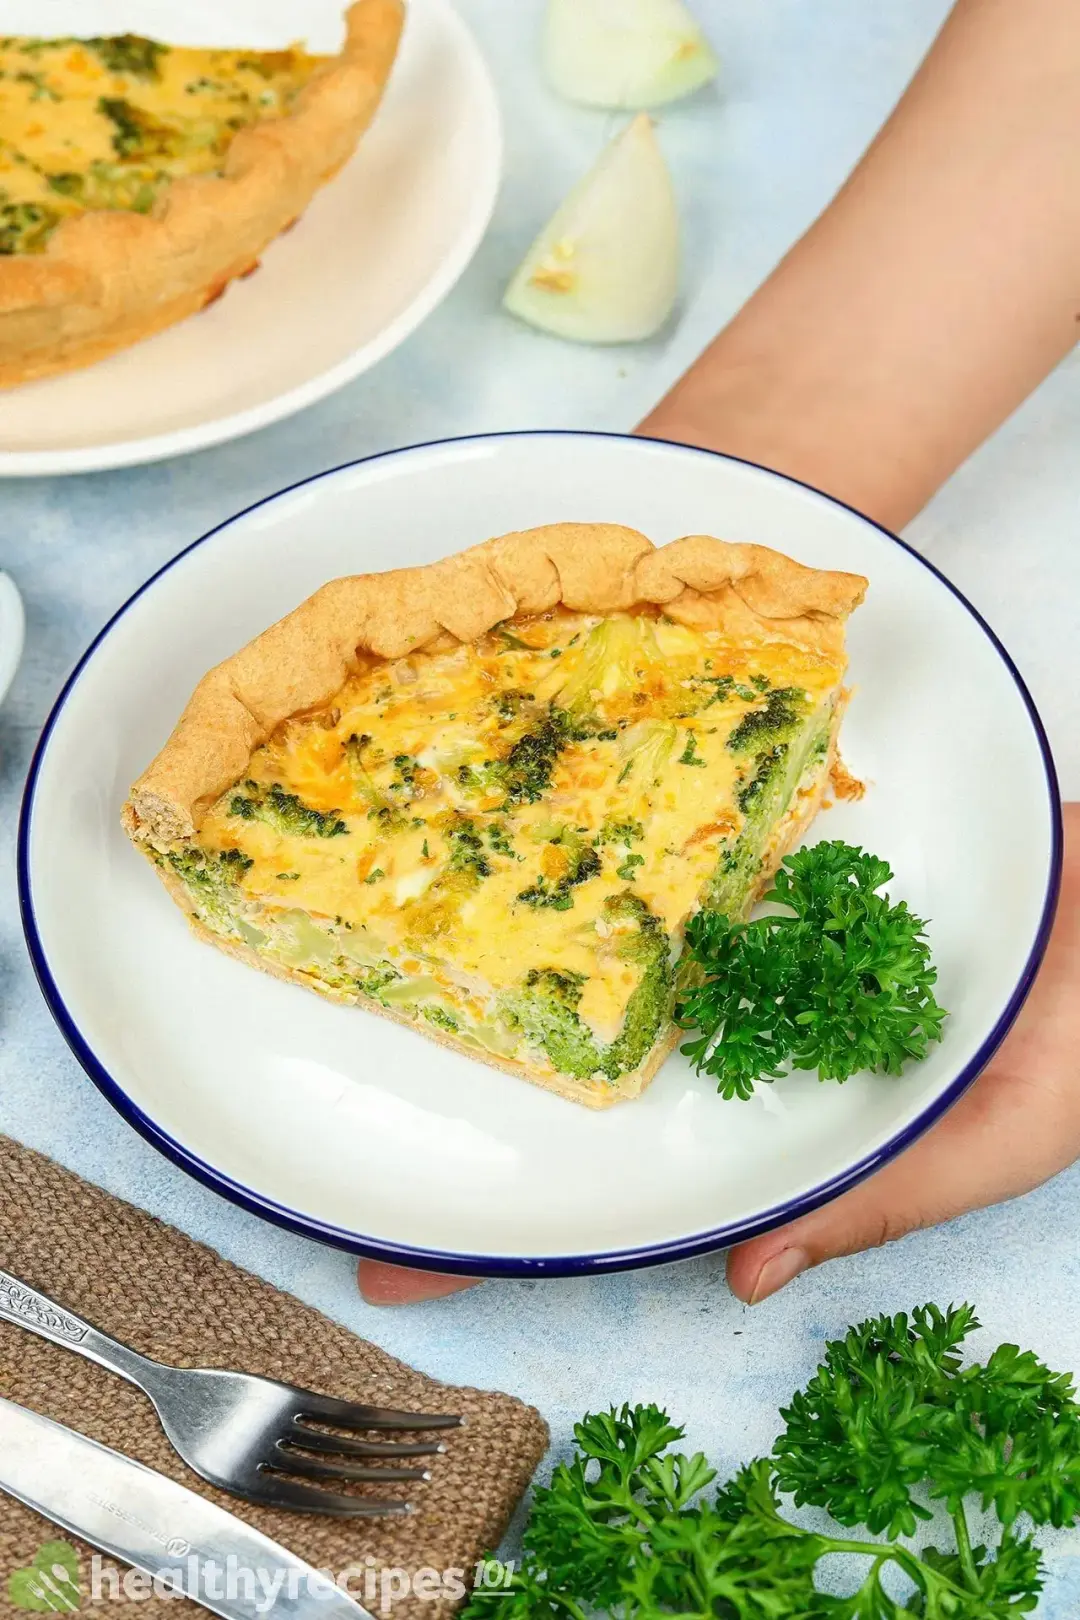 What to Serve with Broccoli Quiche